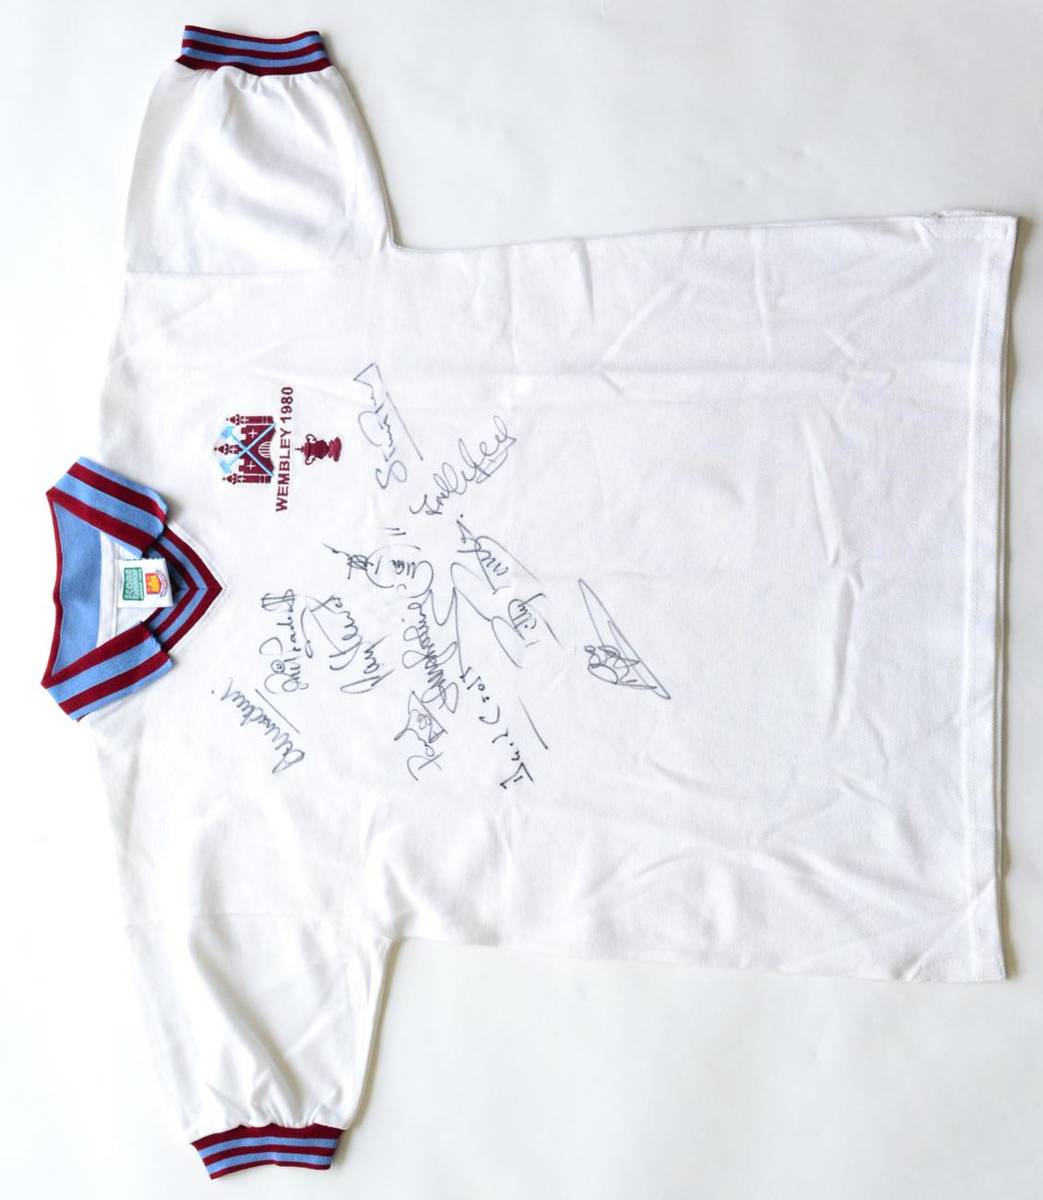 Lot 26 - Signed Football Legends Shirt West Ham United 1980 Cup Winning Team, white, with letter from...